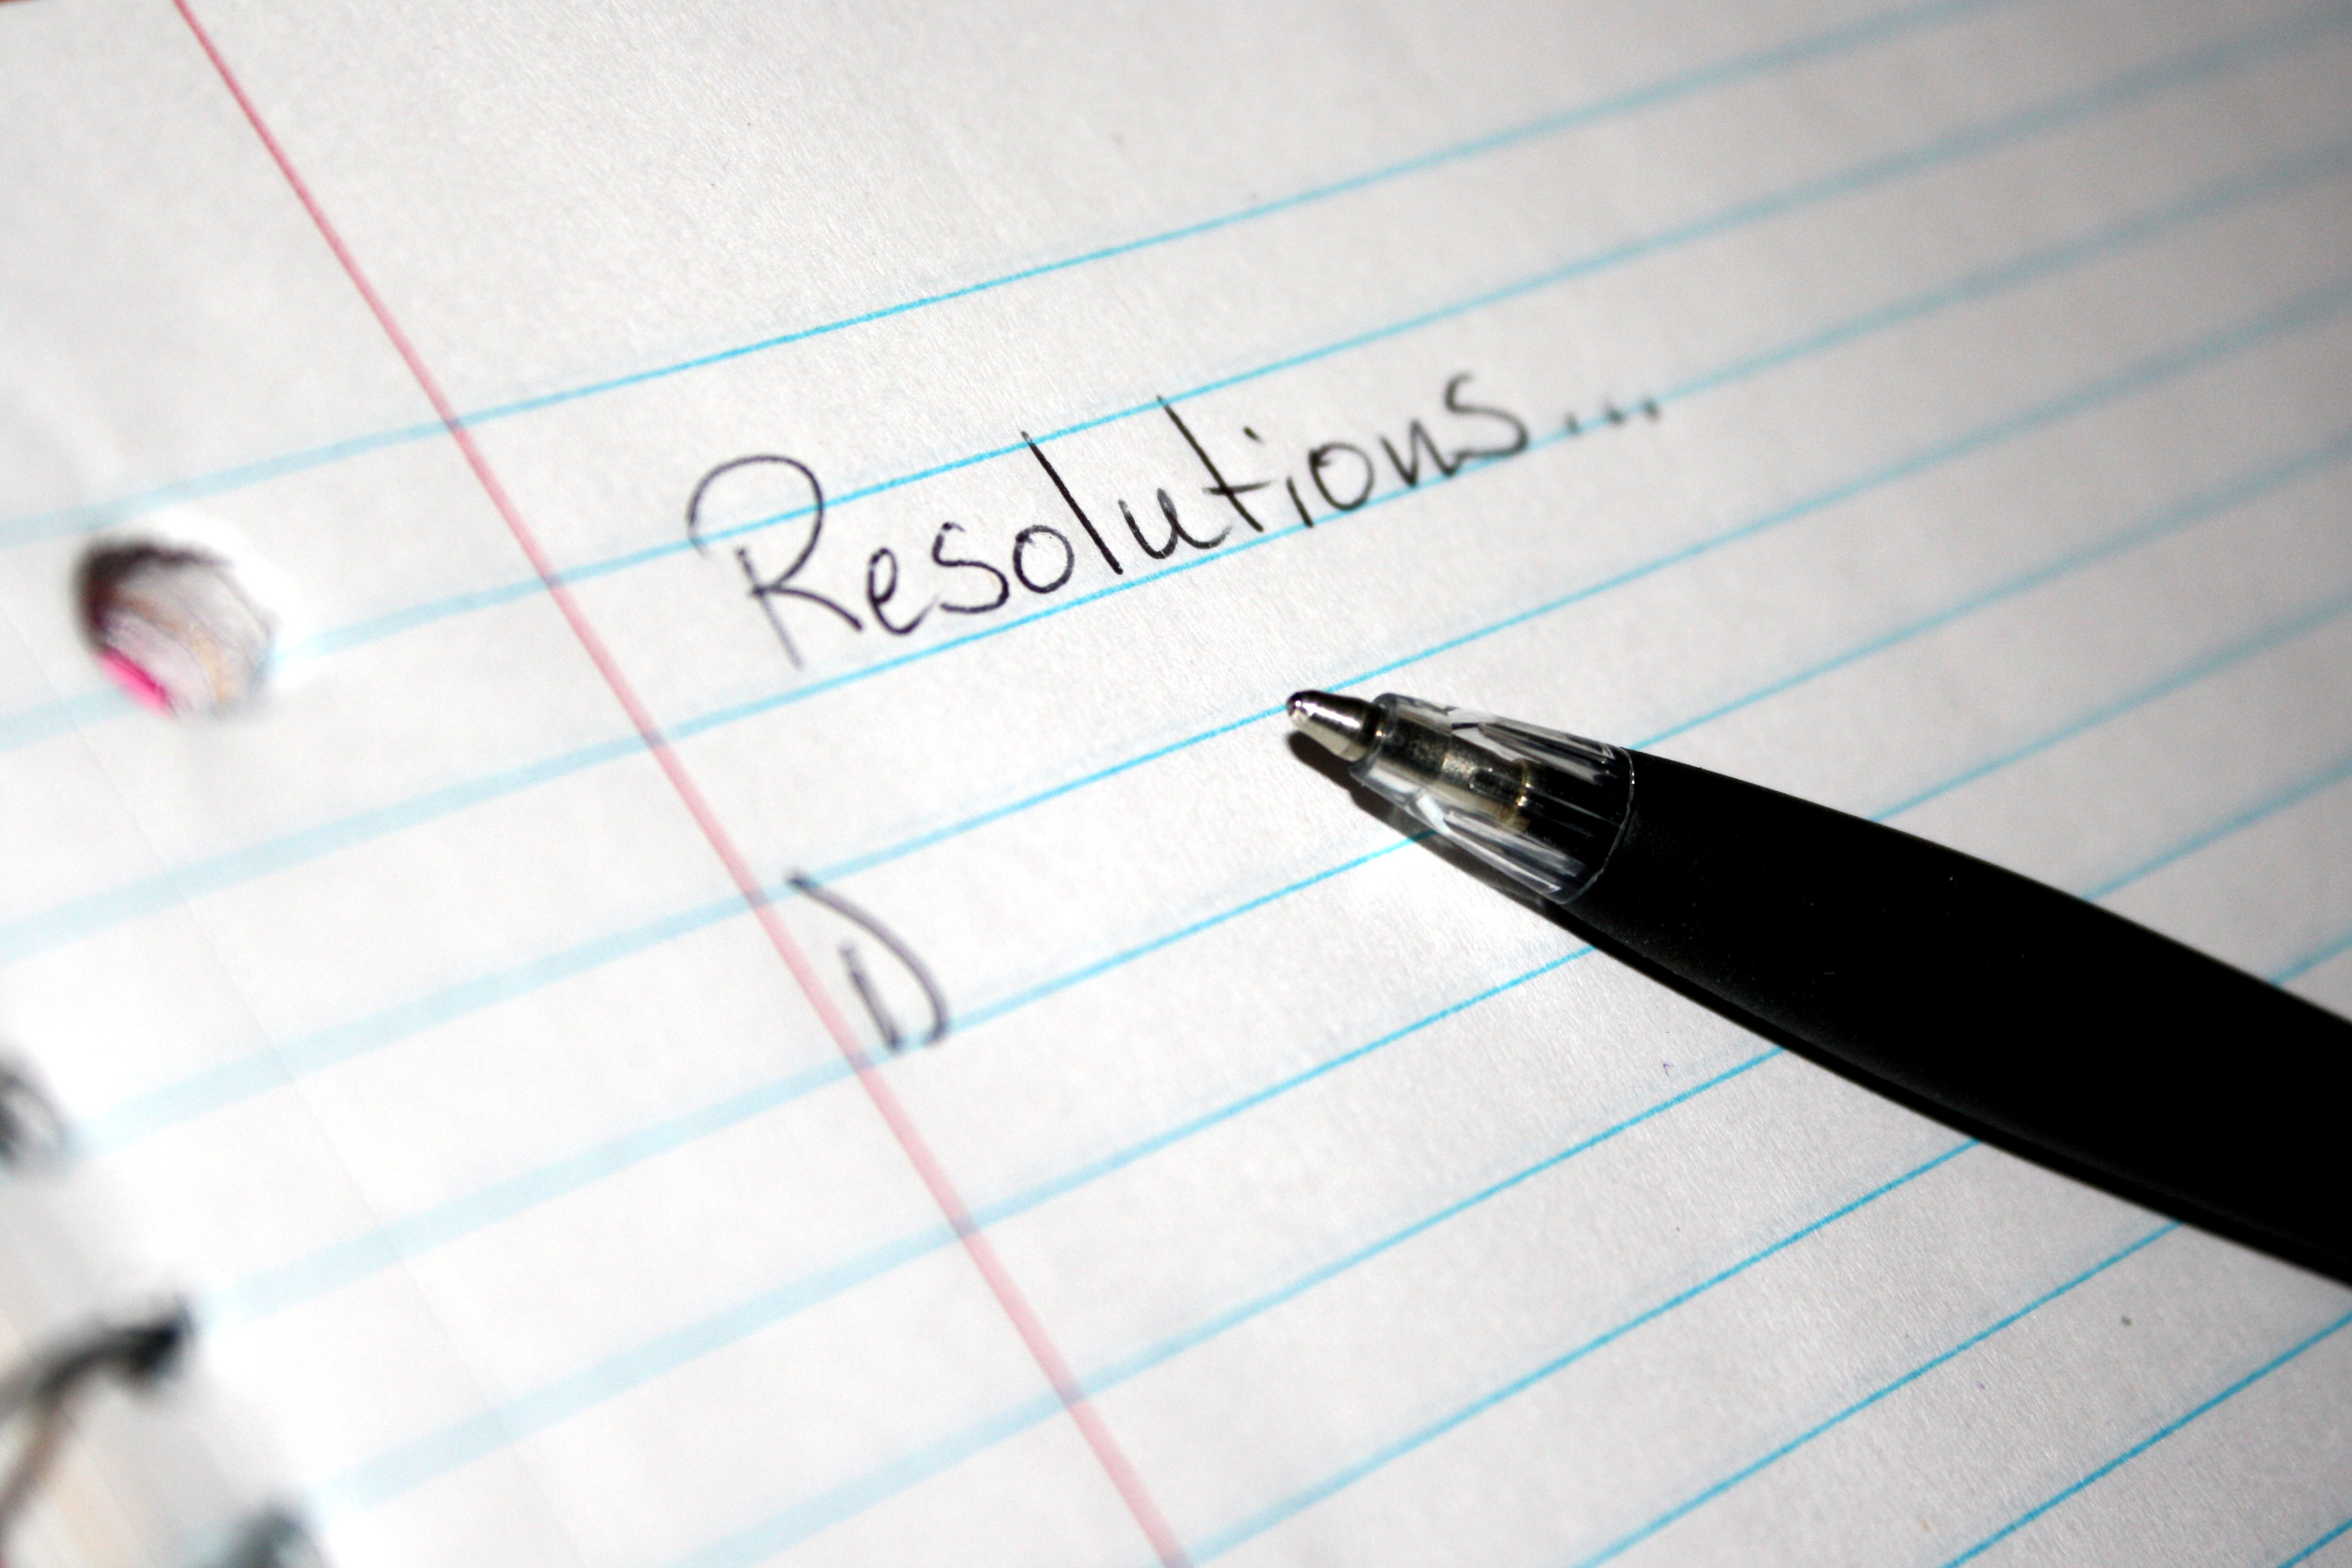 5 New Year’s Resolutions That Can Change Your Life